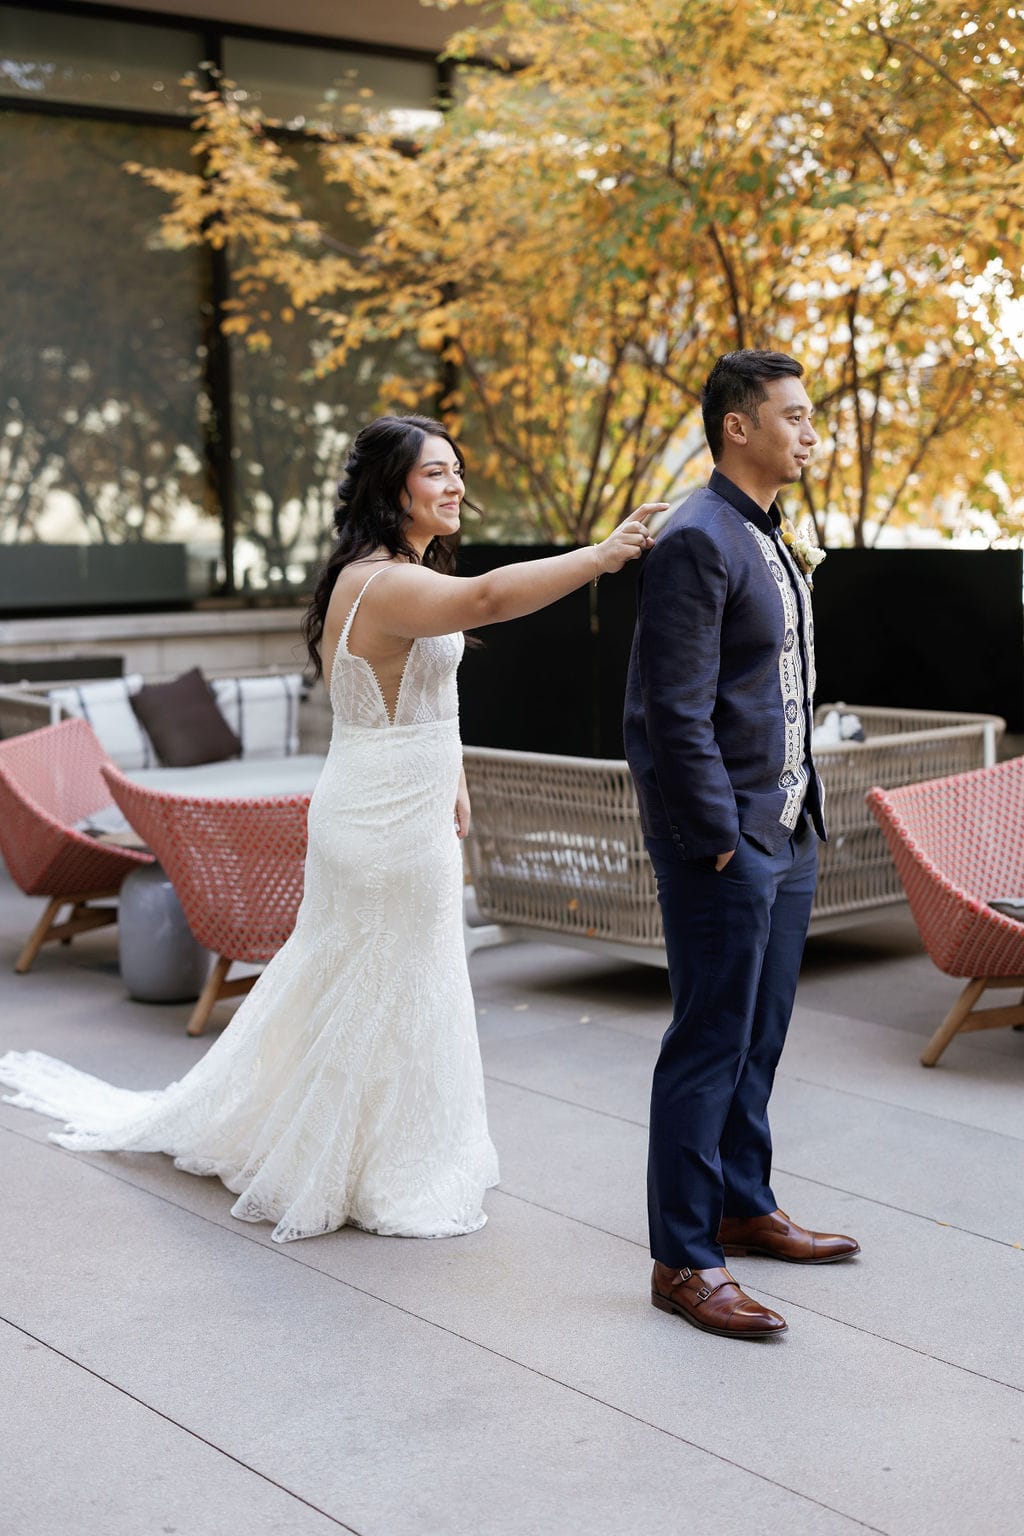 Bride and Groom First Look at Limelight hotel in downtown denver on their patio overlooking union station